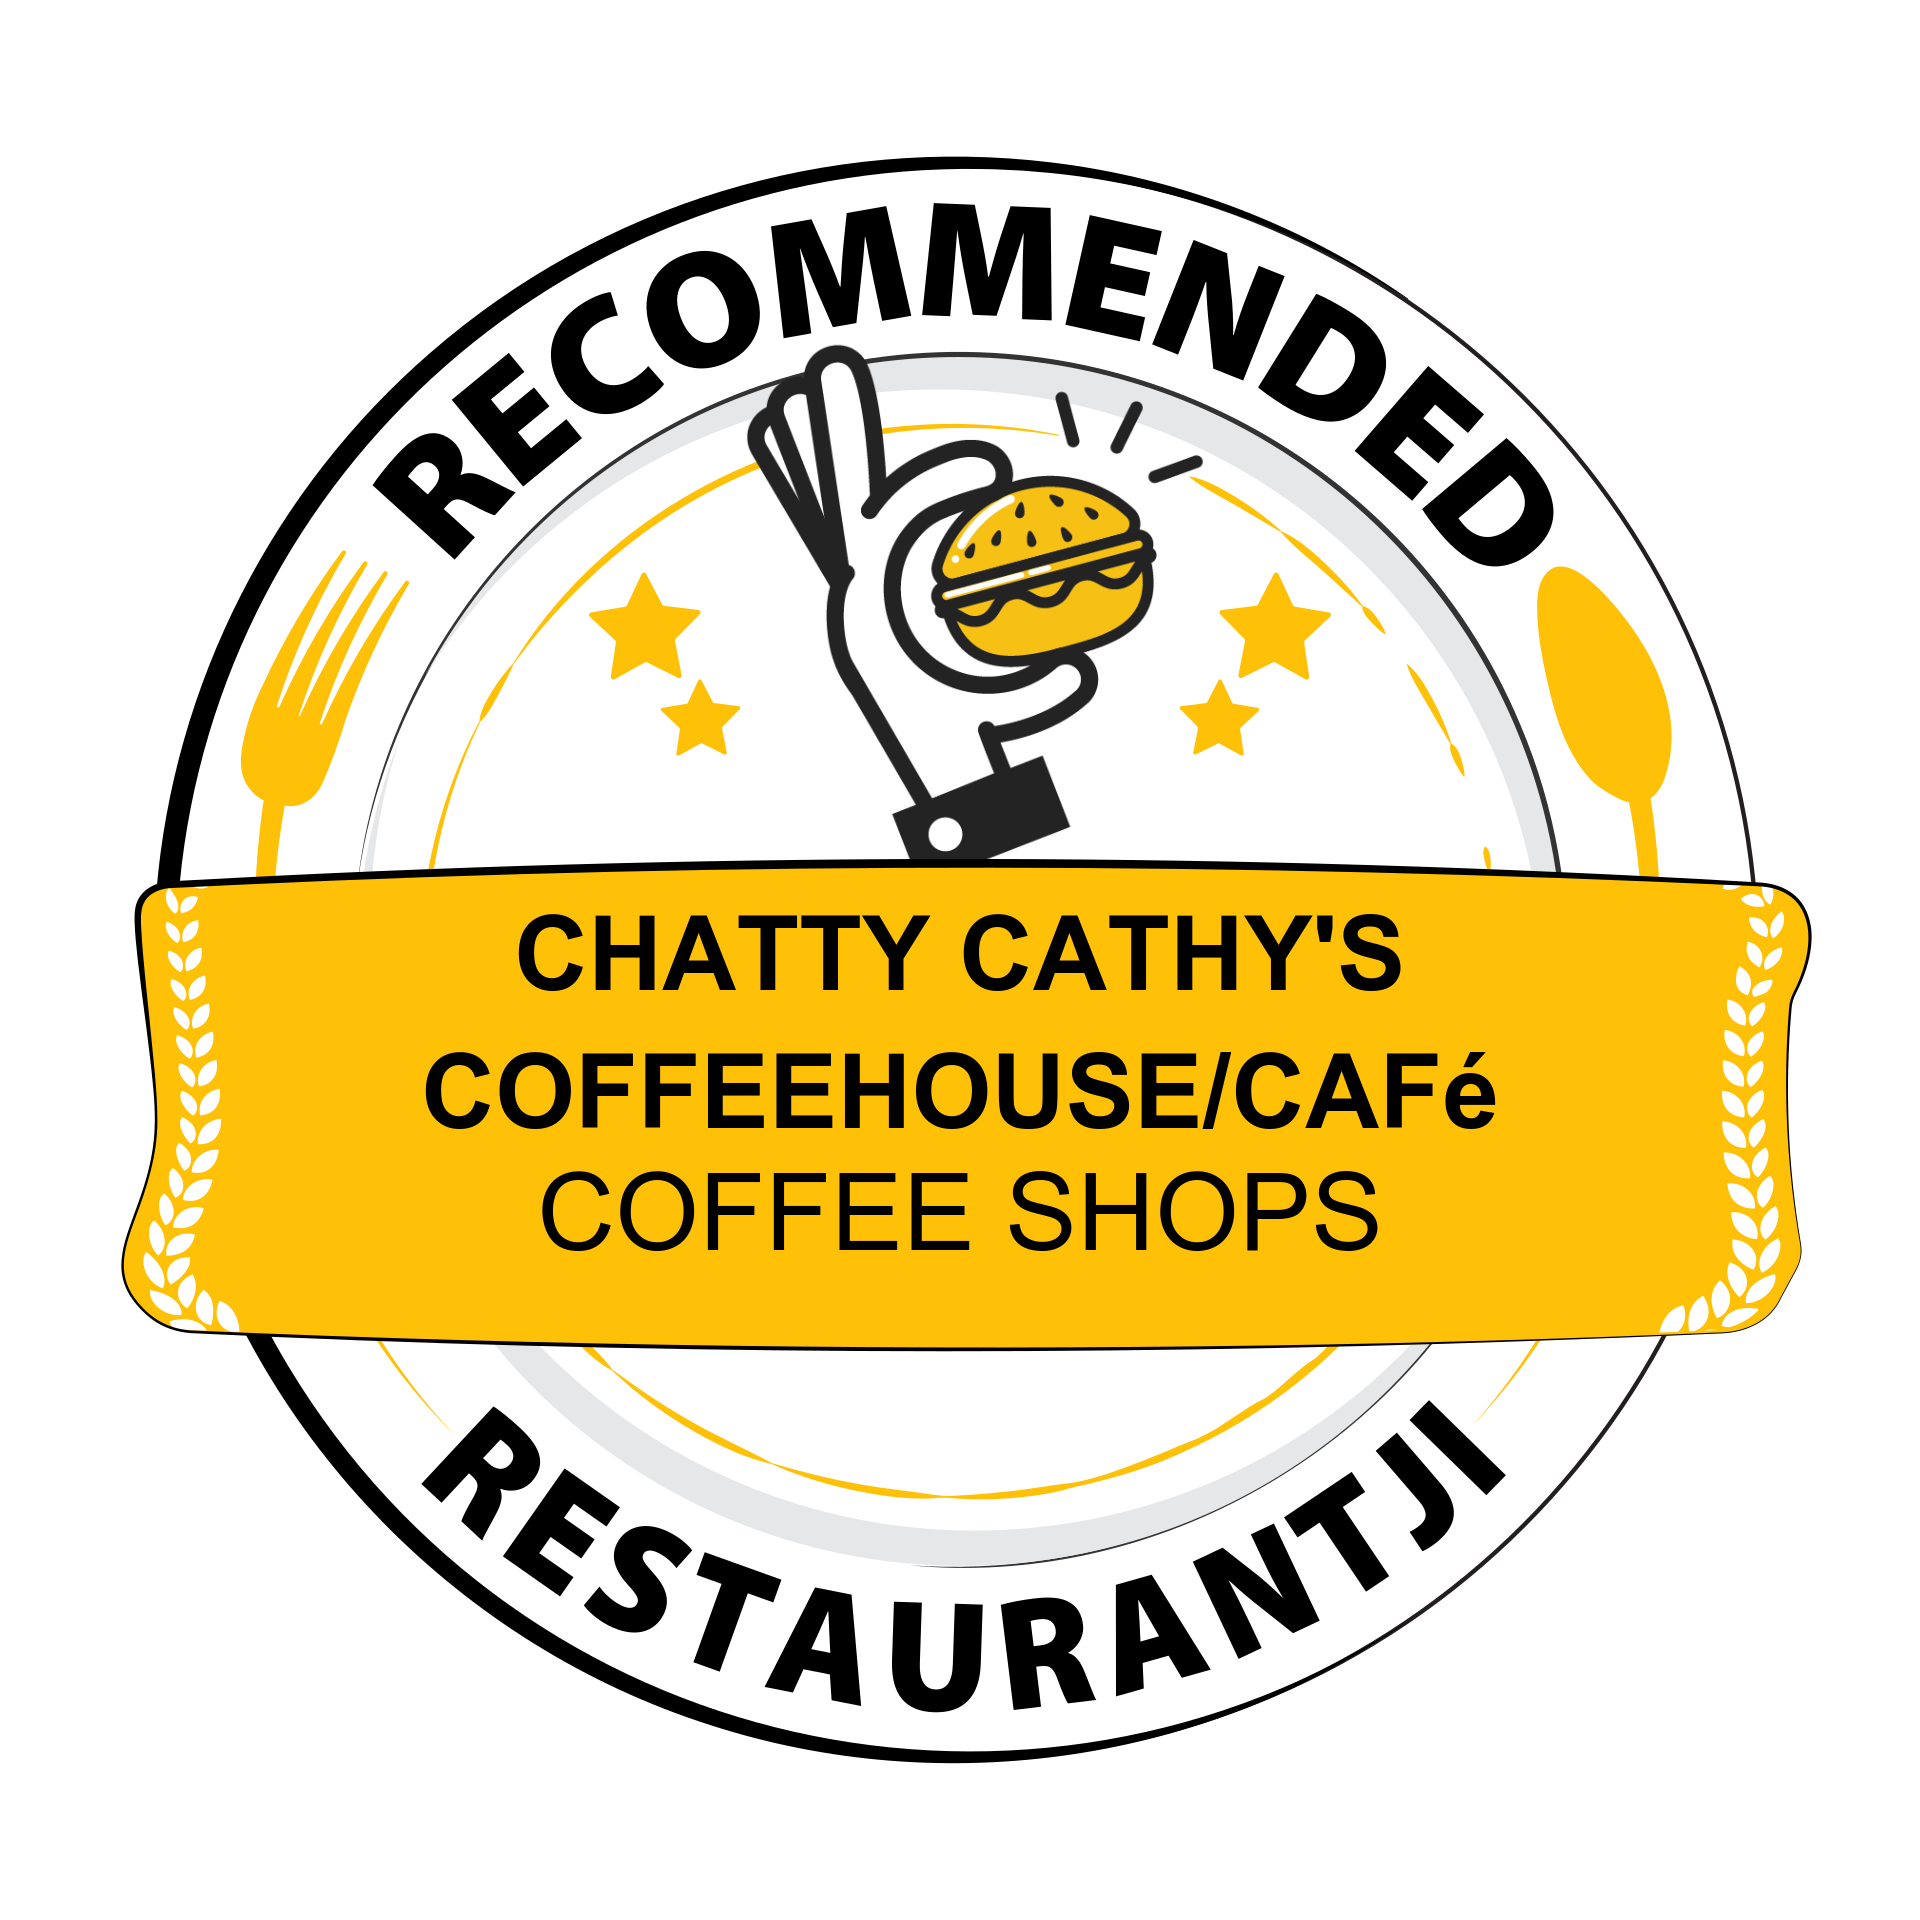 Chatty Cathy's Coffeehouse/Café is celebrated on Restaurantji